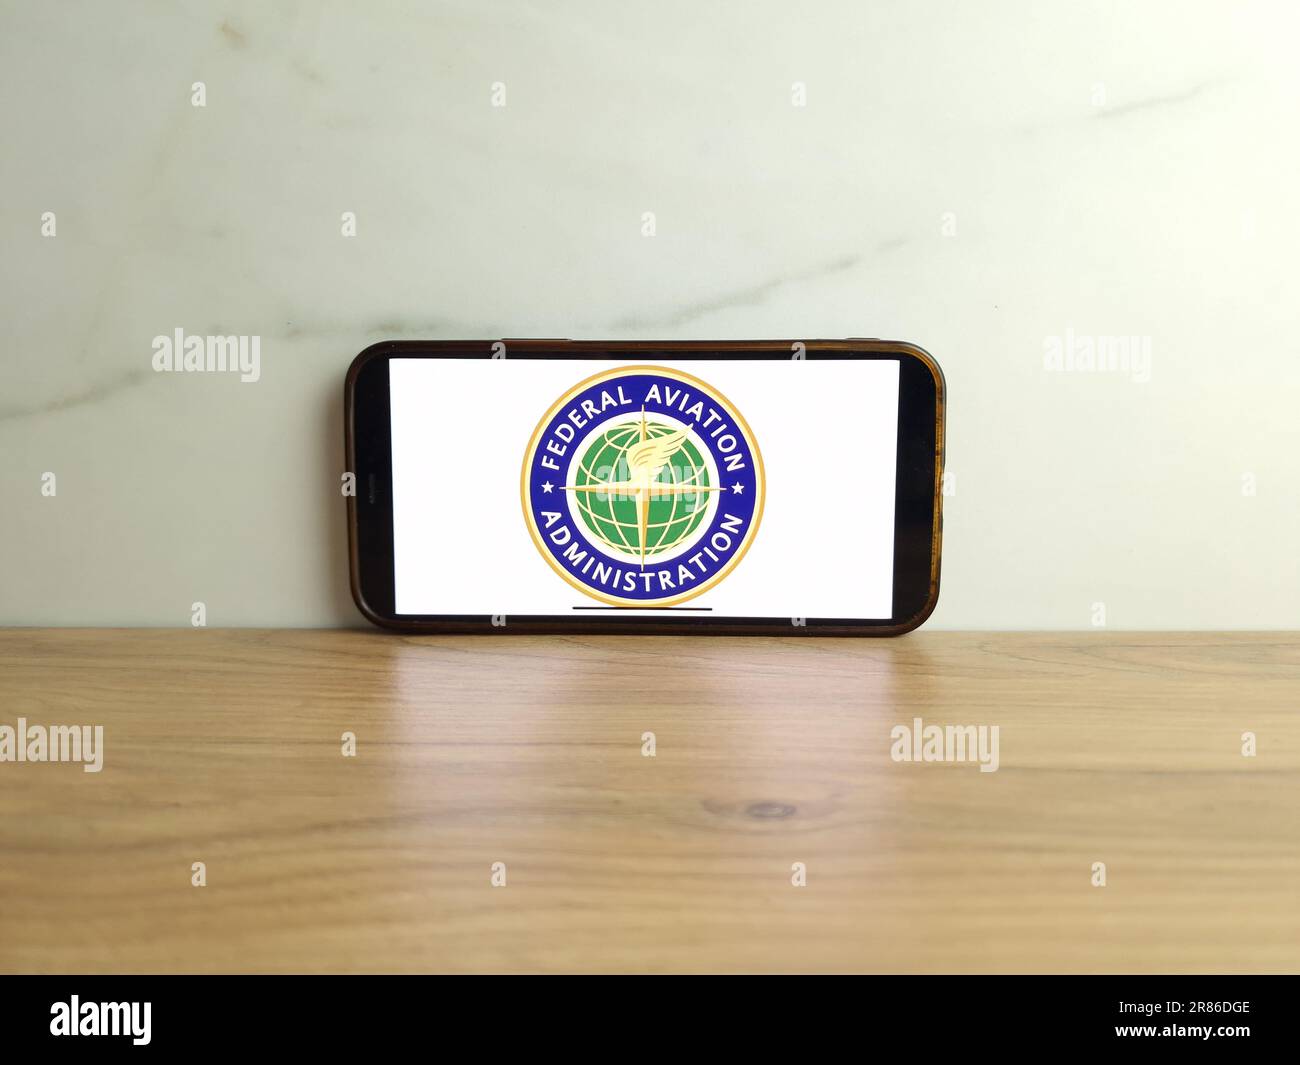 Konskie, Poland - June 17, 2023: FAA Federal Aviation Administration US government agency logo displayed on mobile phone screen Stock Photo